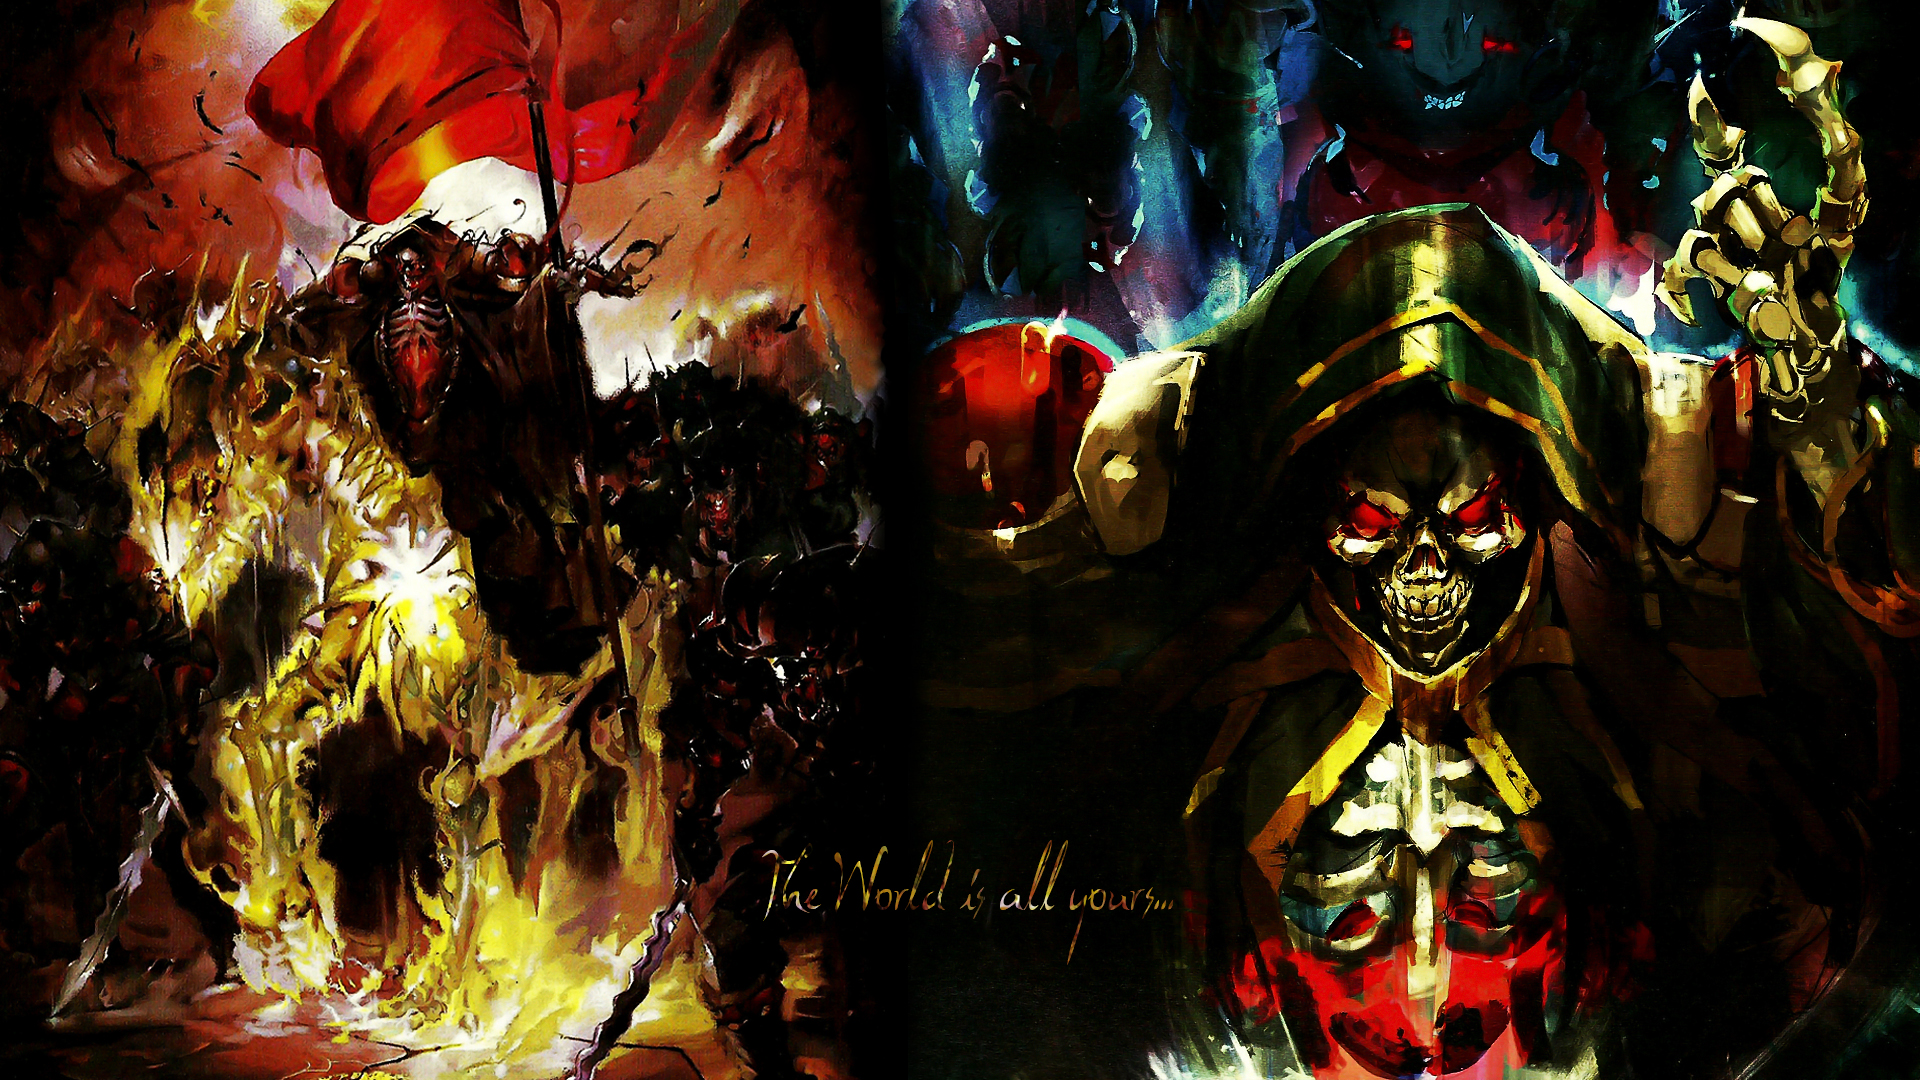 Free Download Overlord Wallpapers Pictures Images 19x1080 For Your Desktop Mobile Tablet Explore 77 Overlord Wallpaper Overlord Anime Wallpaper Overlord Albedo Wallpaper